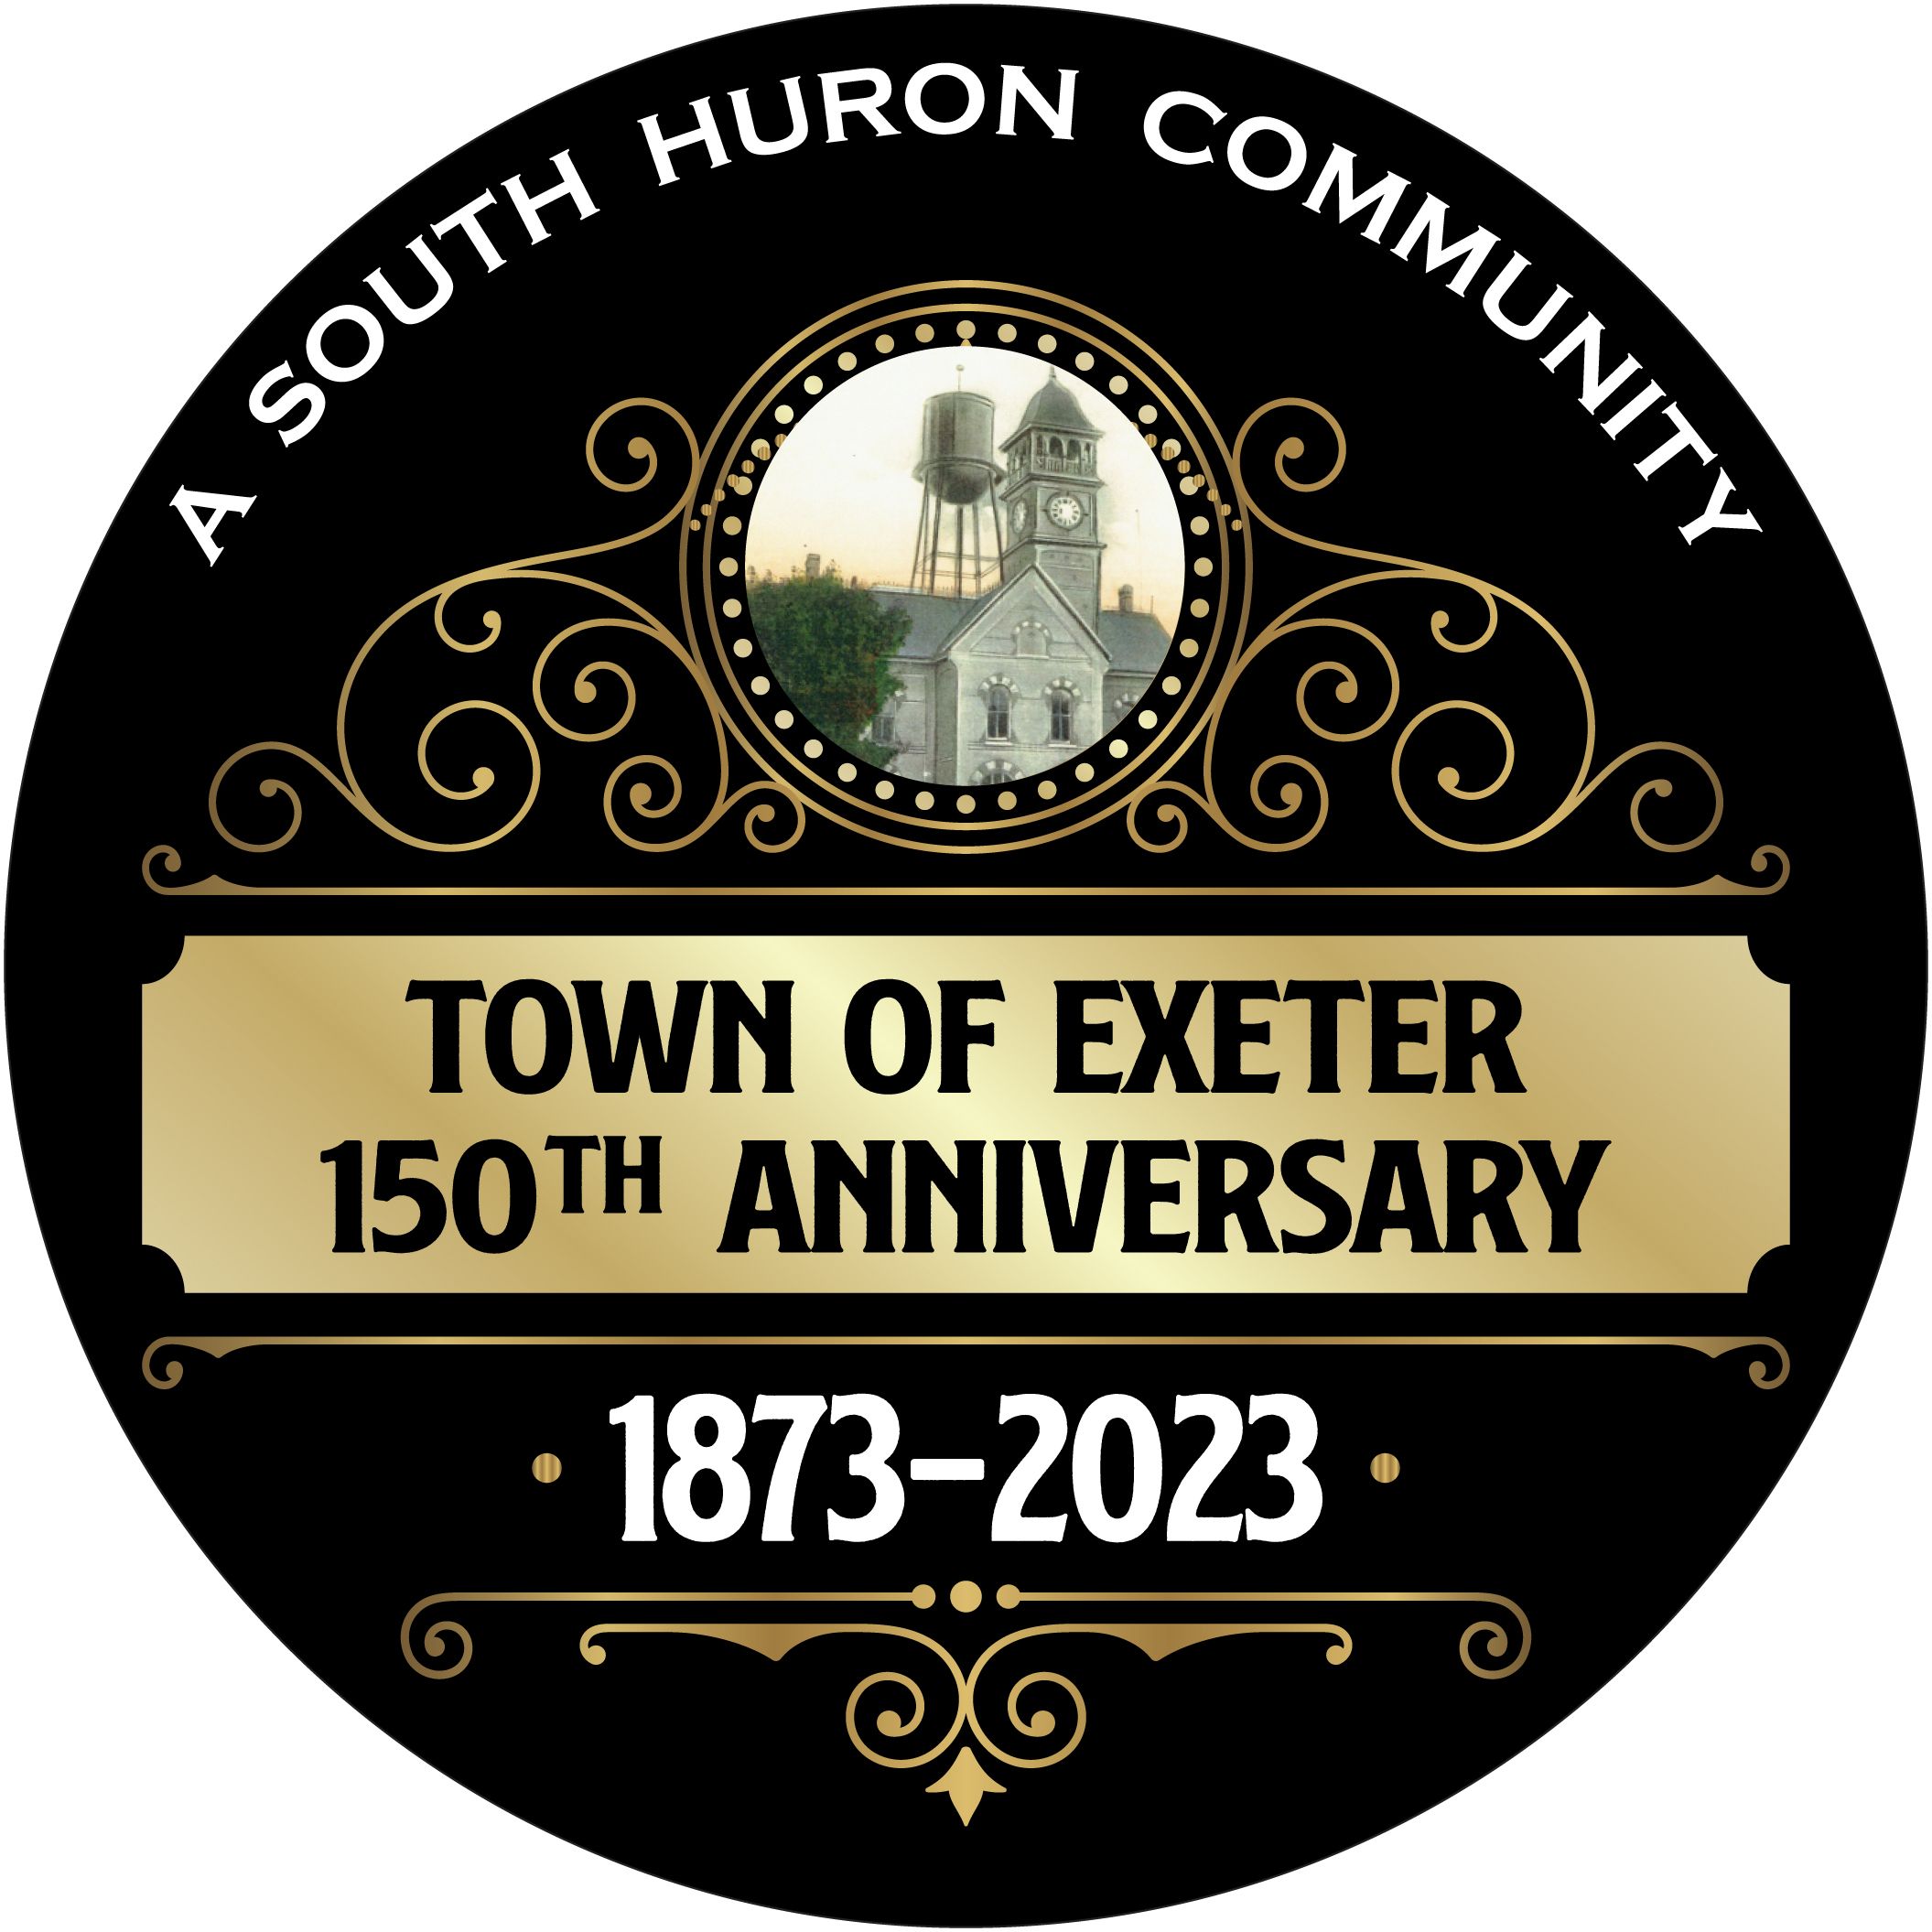 Exeter is ready to celebrate 150 years